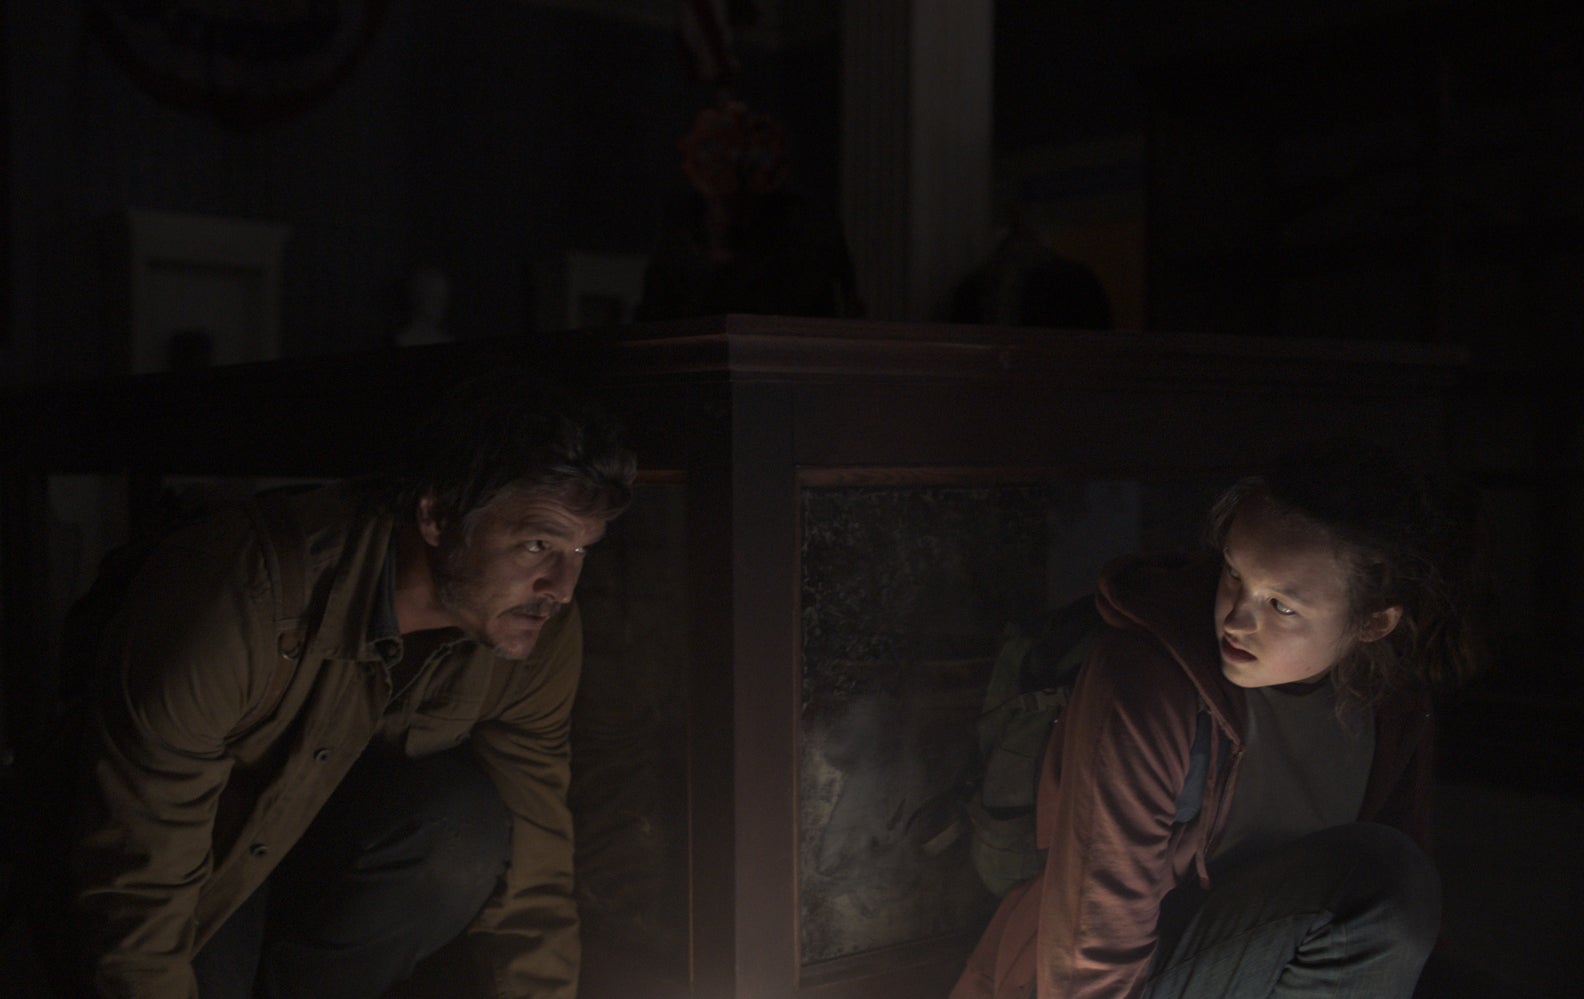 Pedro Pascal and Bella Ramsey in ‘The Last of Us’